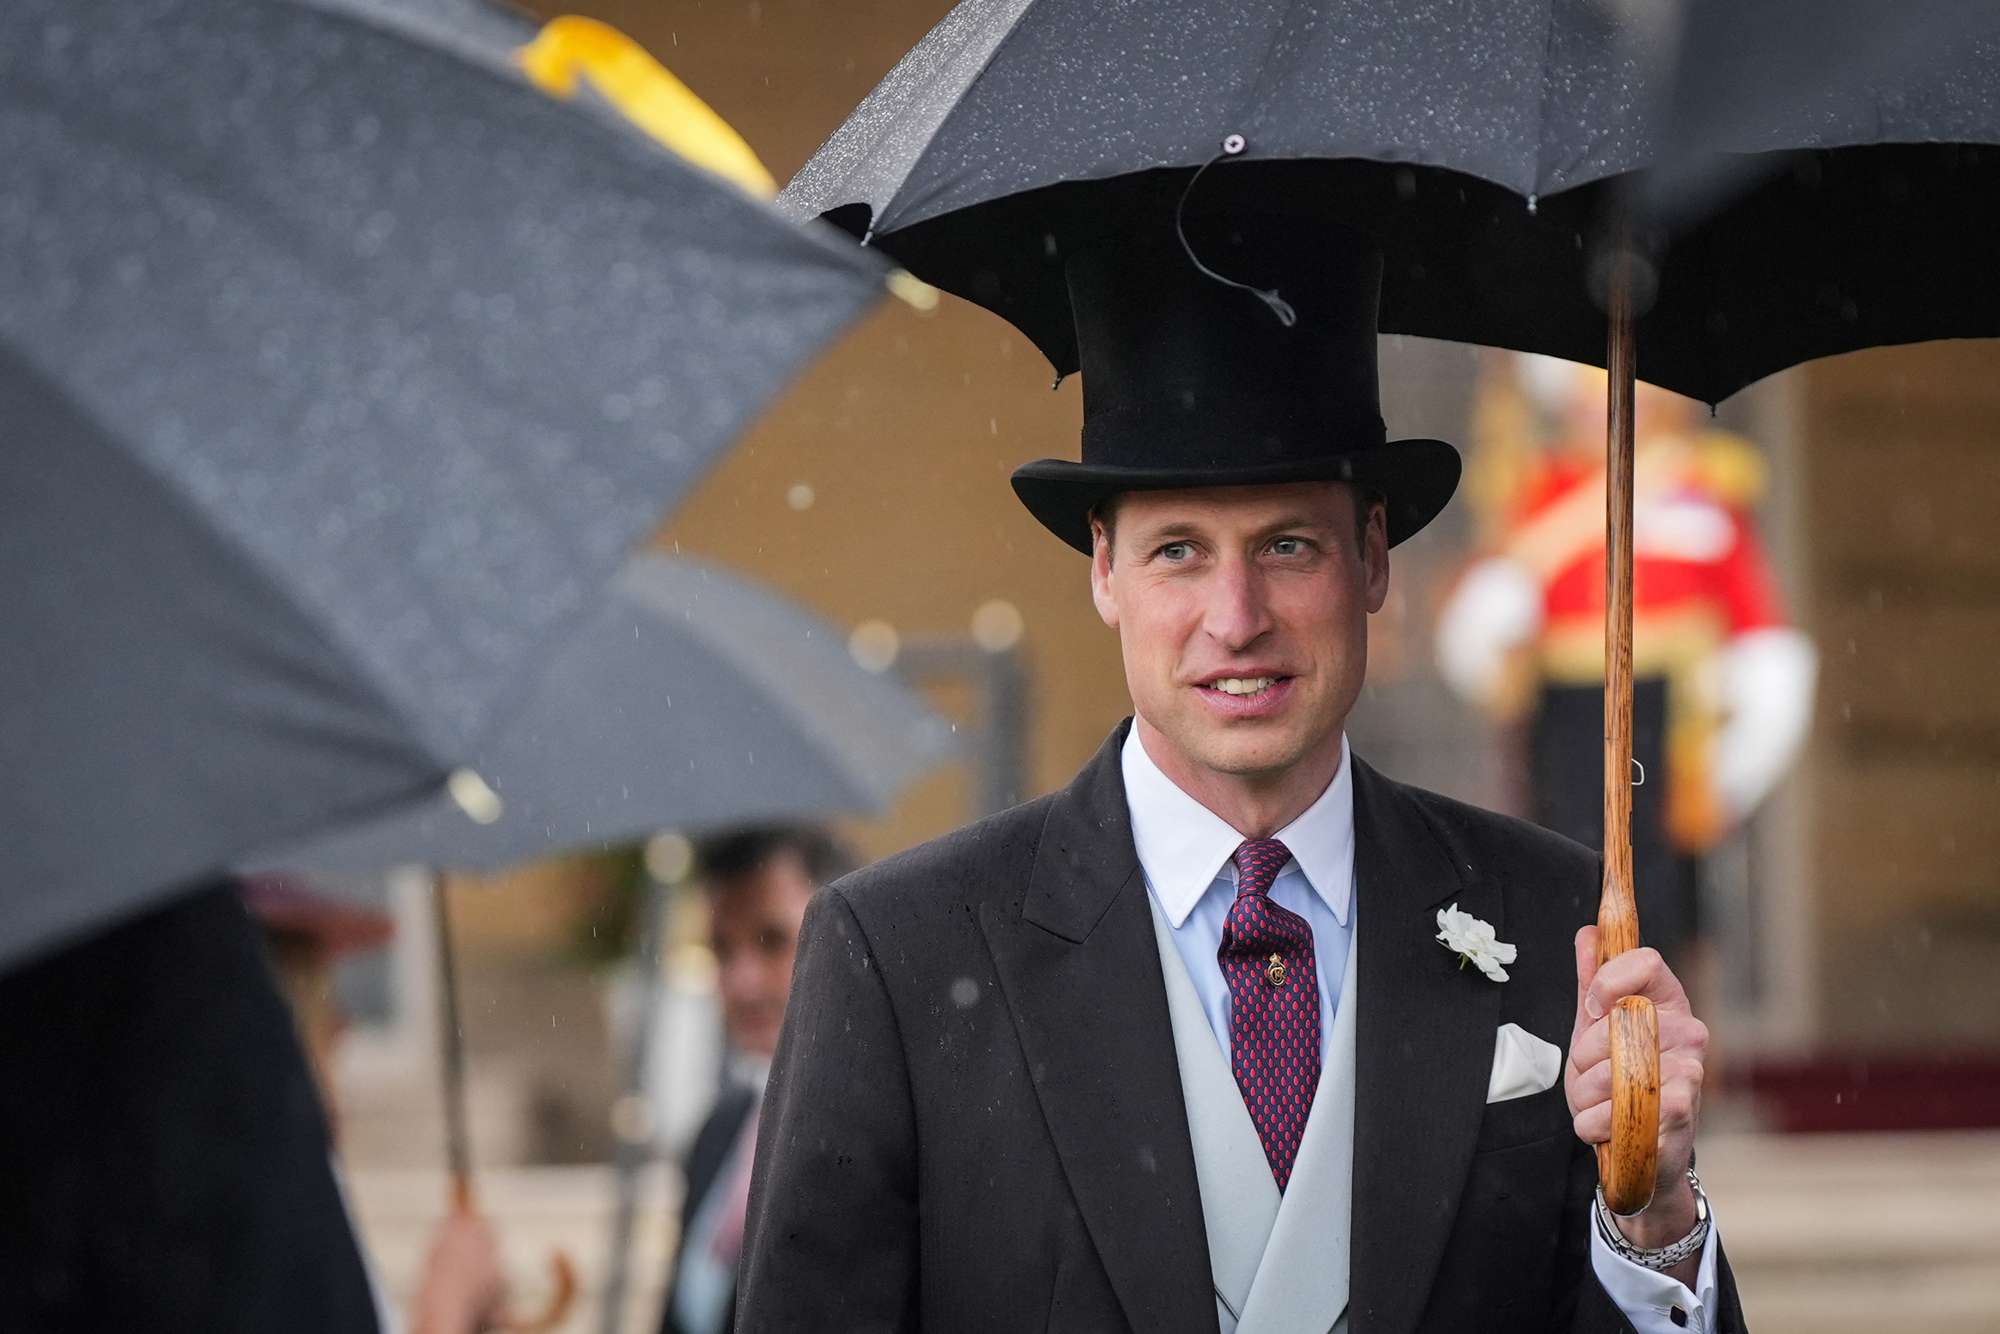 Prince William Teams Up with His Royal Cousins to Host a Rainy Buckingham Palace Garden Party